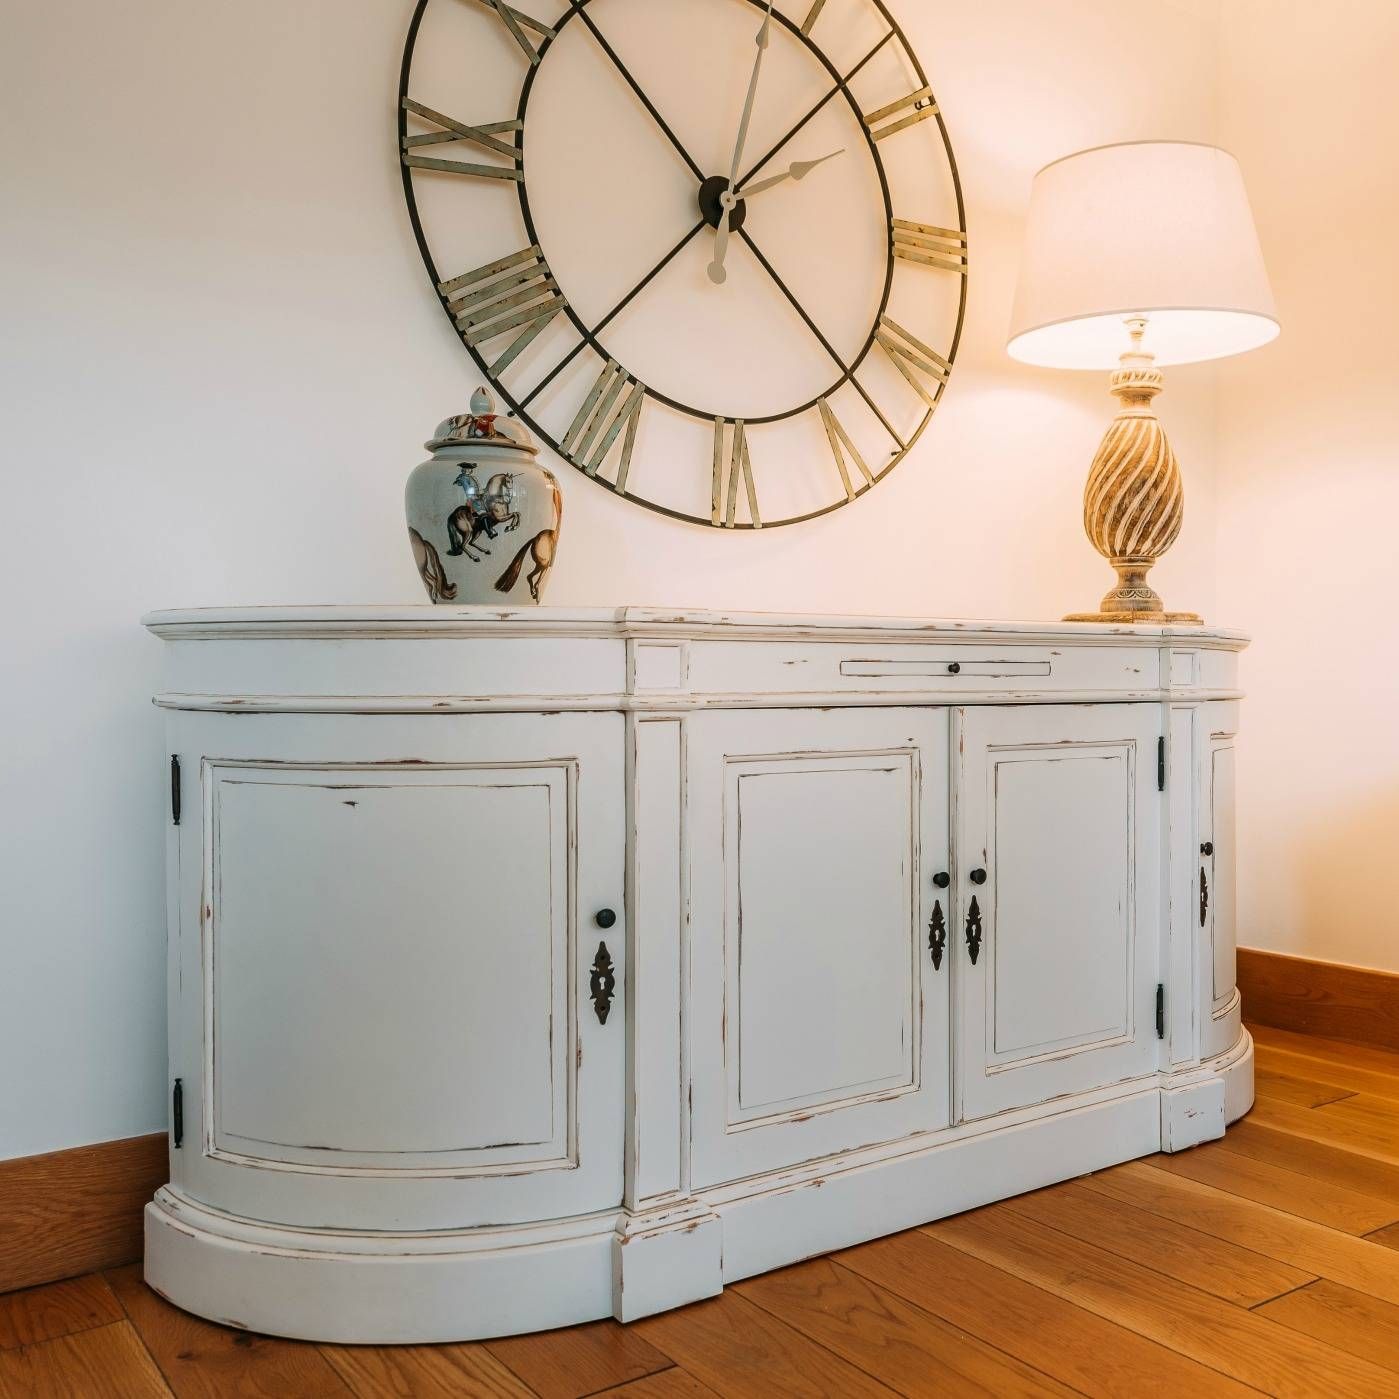 Aged French Distressed White Large Sideboard Furniture – La Maison Pertaining To Most Recently Released French Sideboards (View 5 of 15)